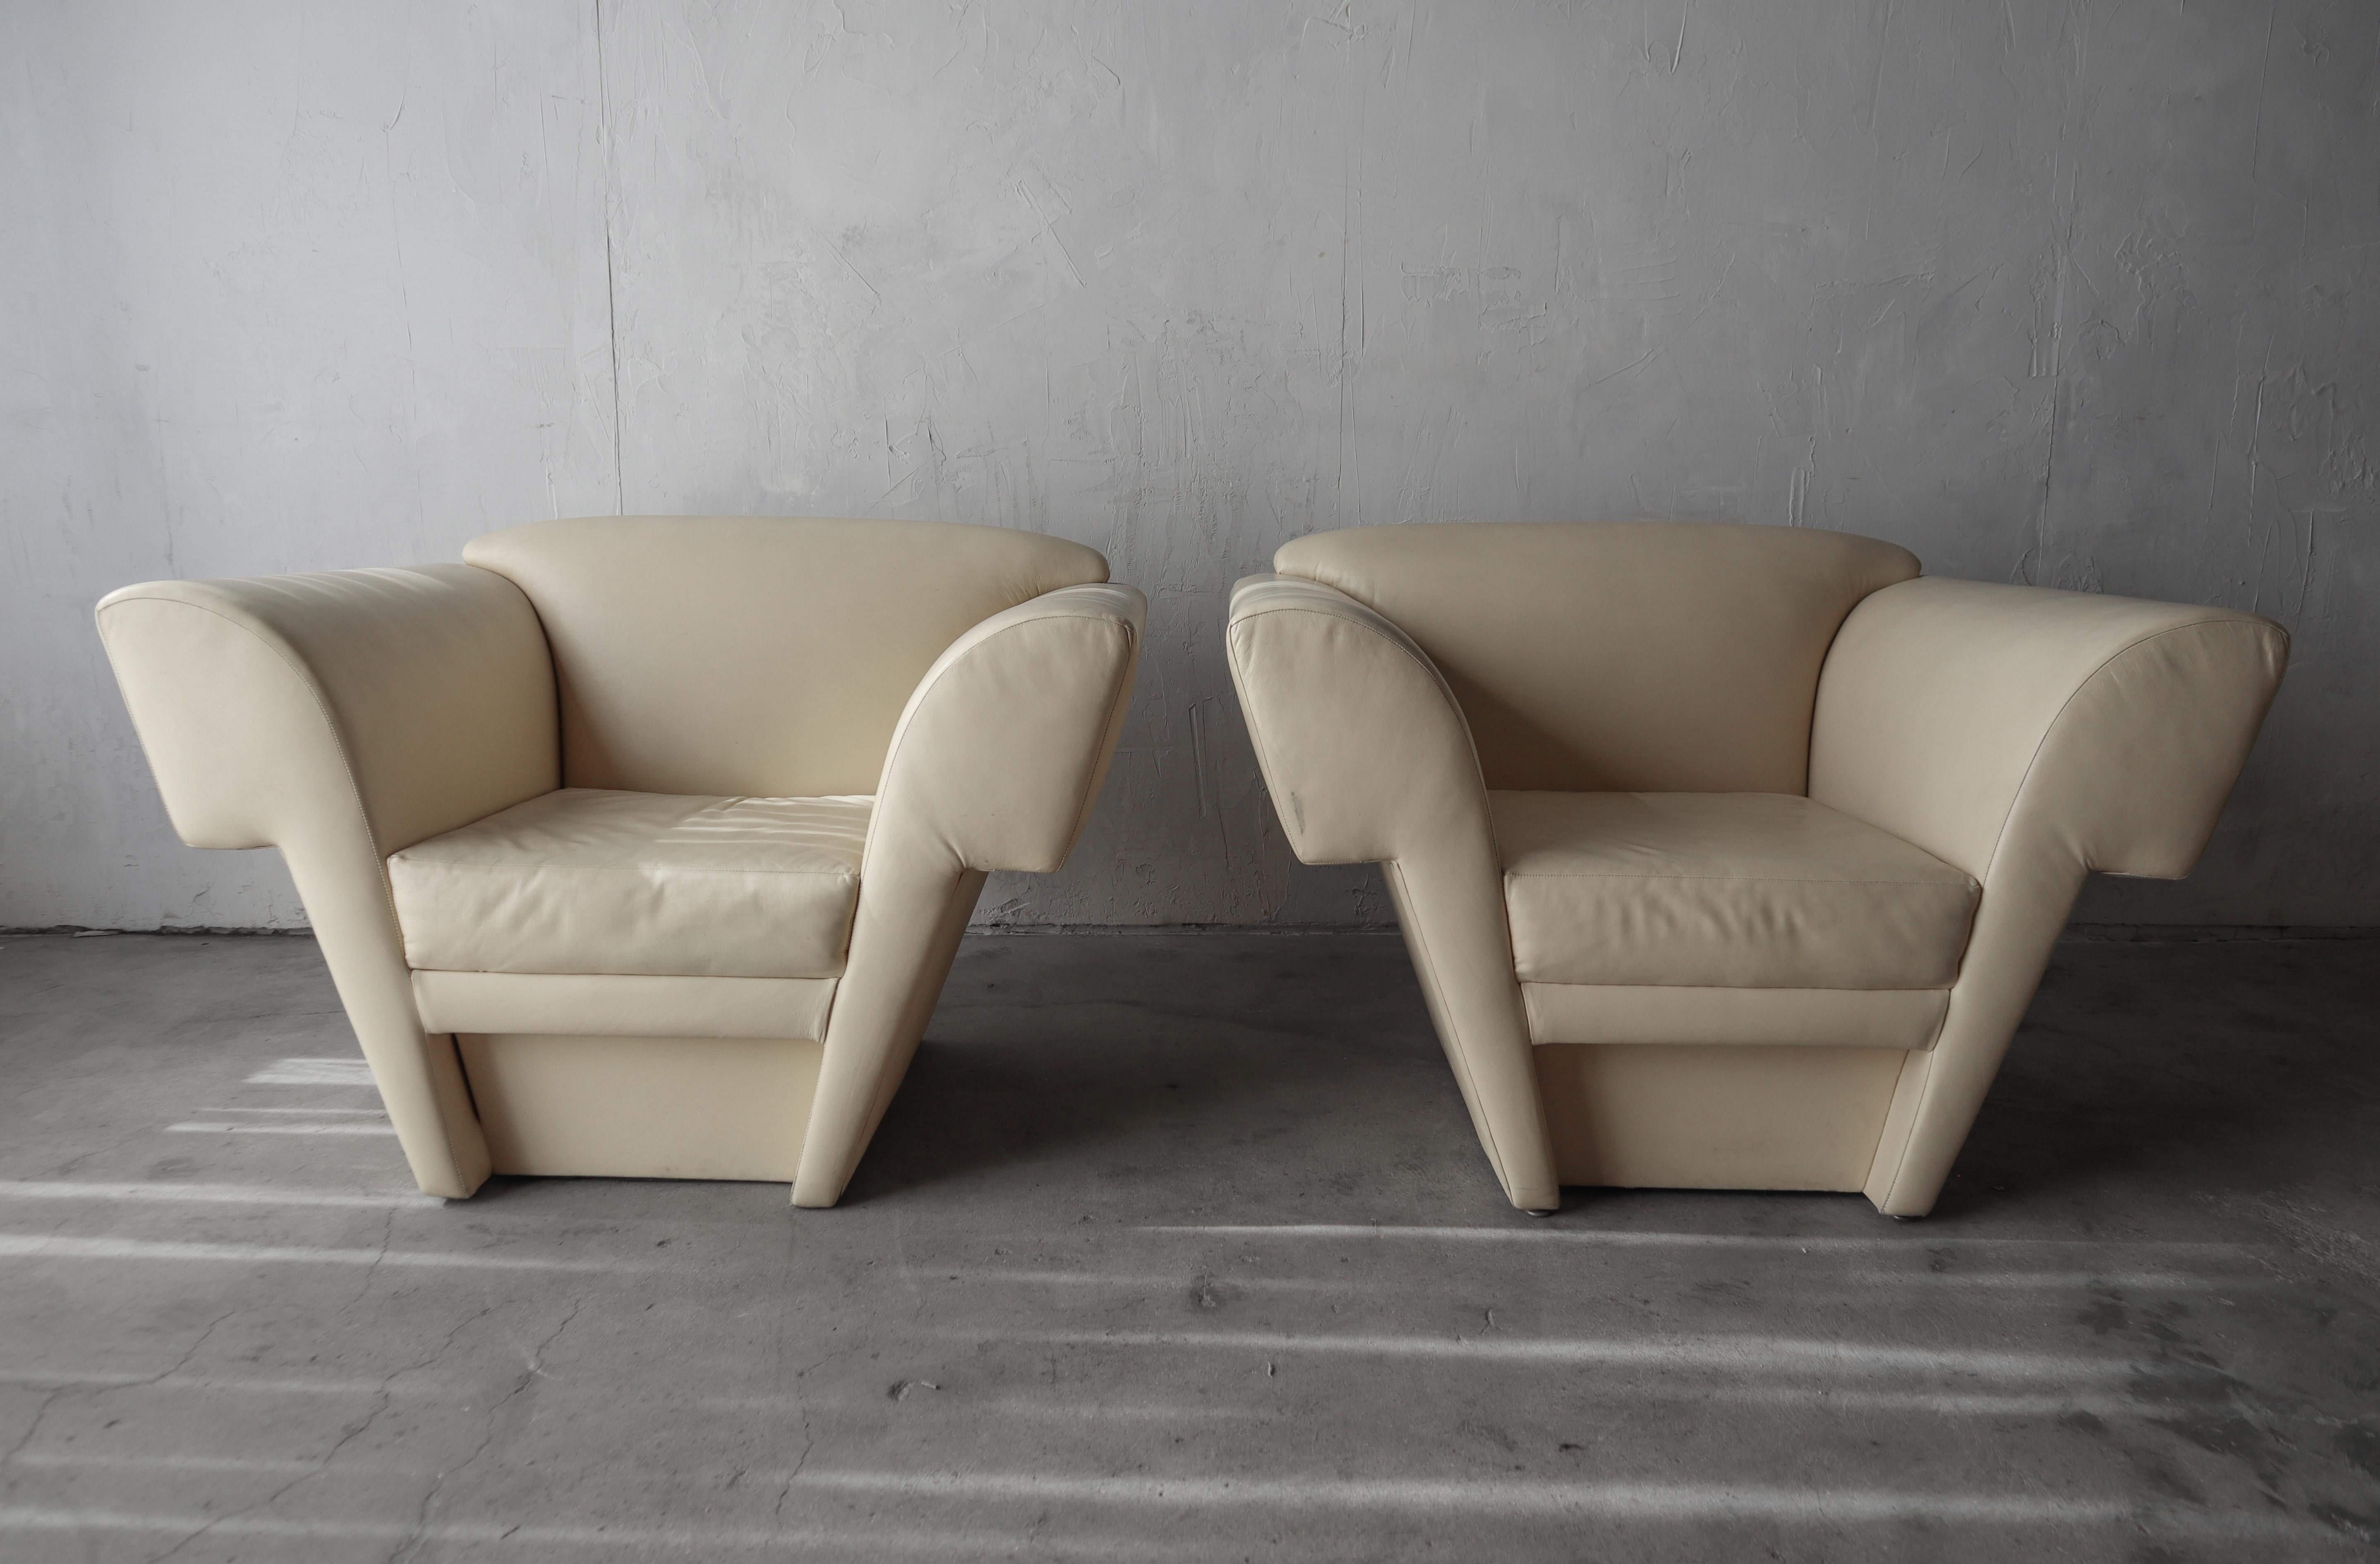 Lines....Lines....Lines

If you are looking for an incredible pair of post modern chairs look no further. The lines of these beauties are about as true post modern as you'll find. 

Although the soft cream colored leather is in fairly good